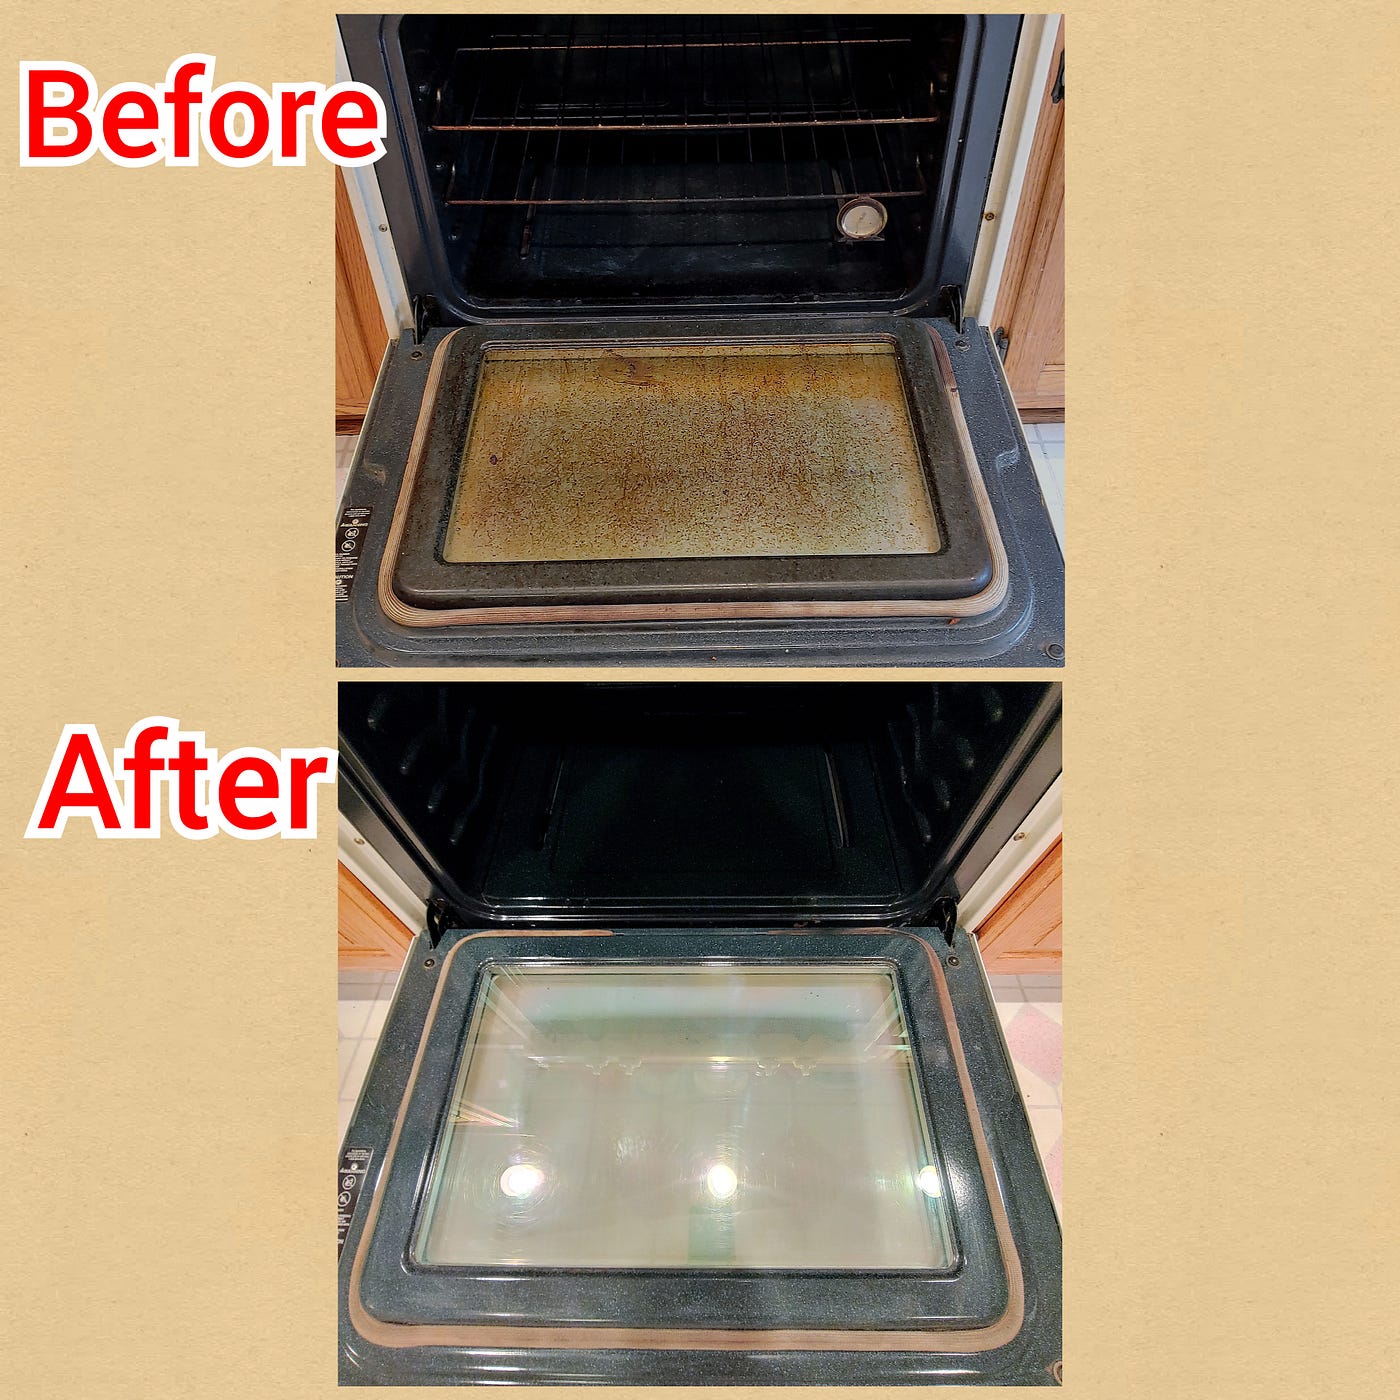 Clean Your Oven With Baking Soda and Vinegar  by Jessica LeMasson